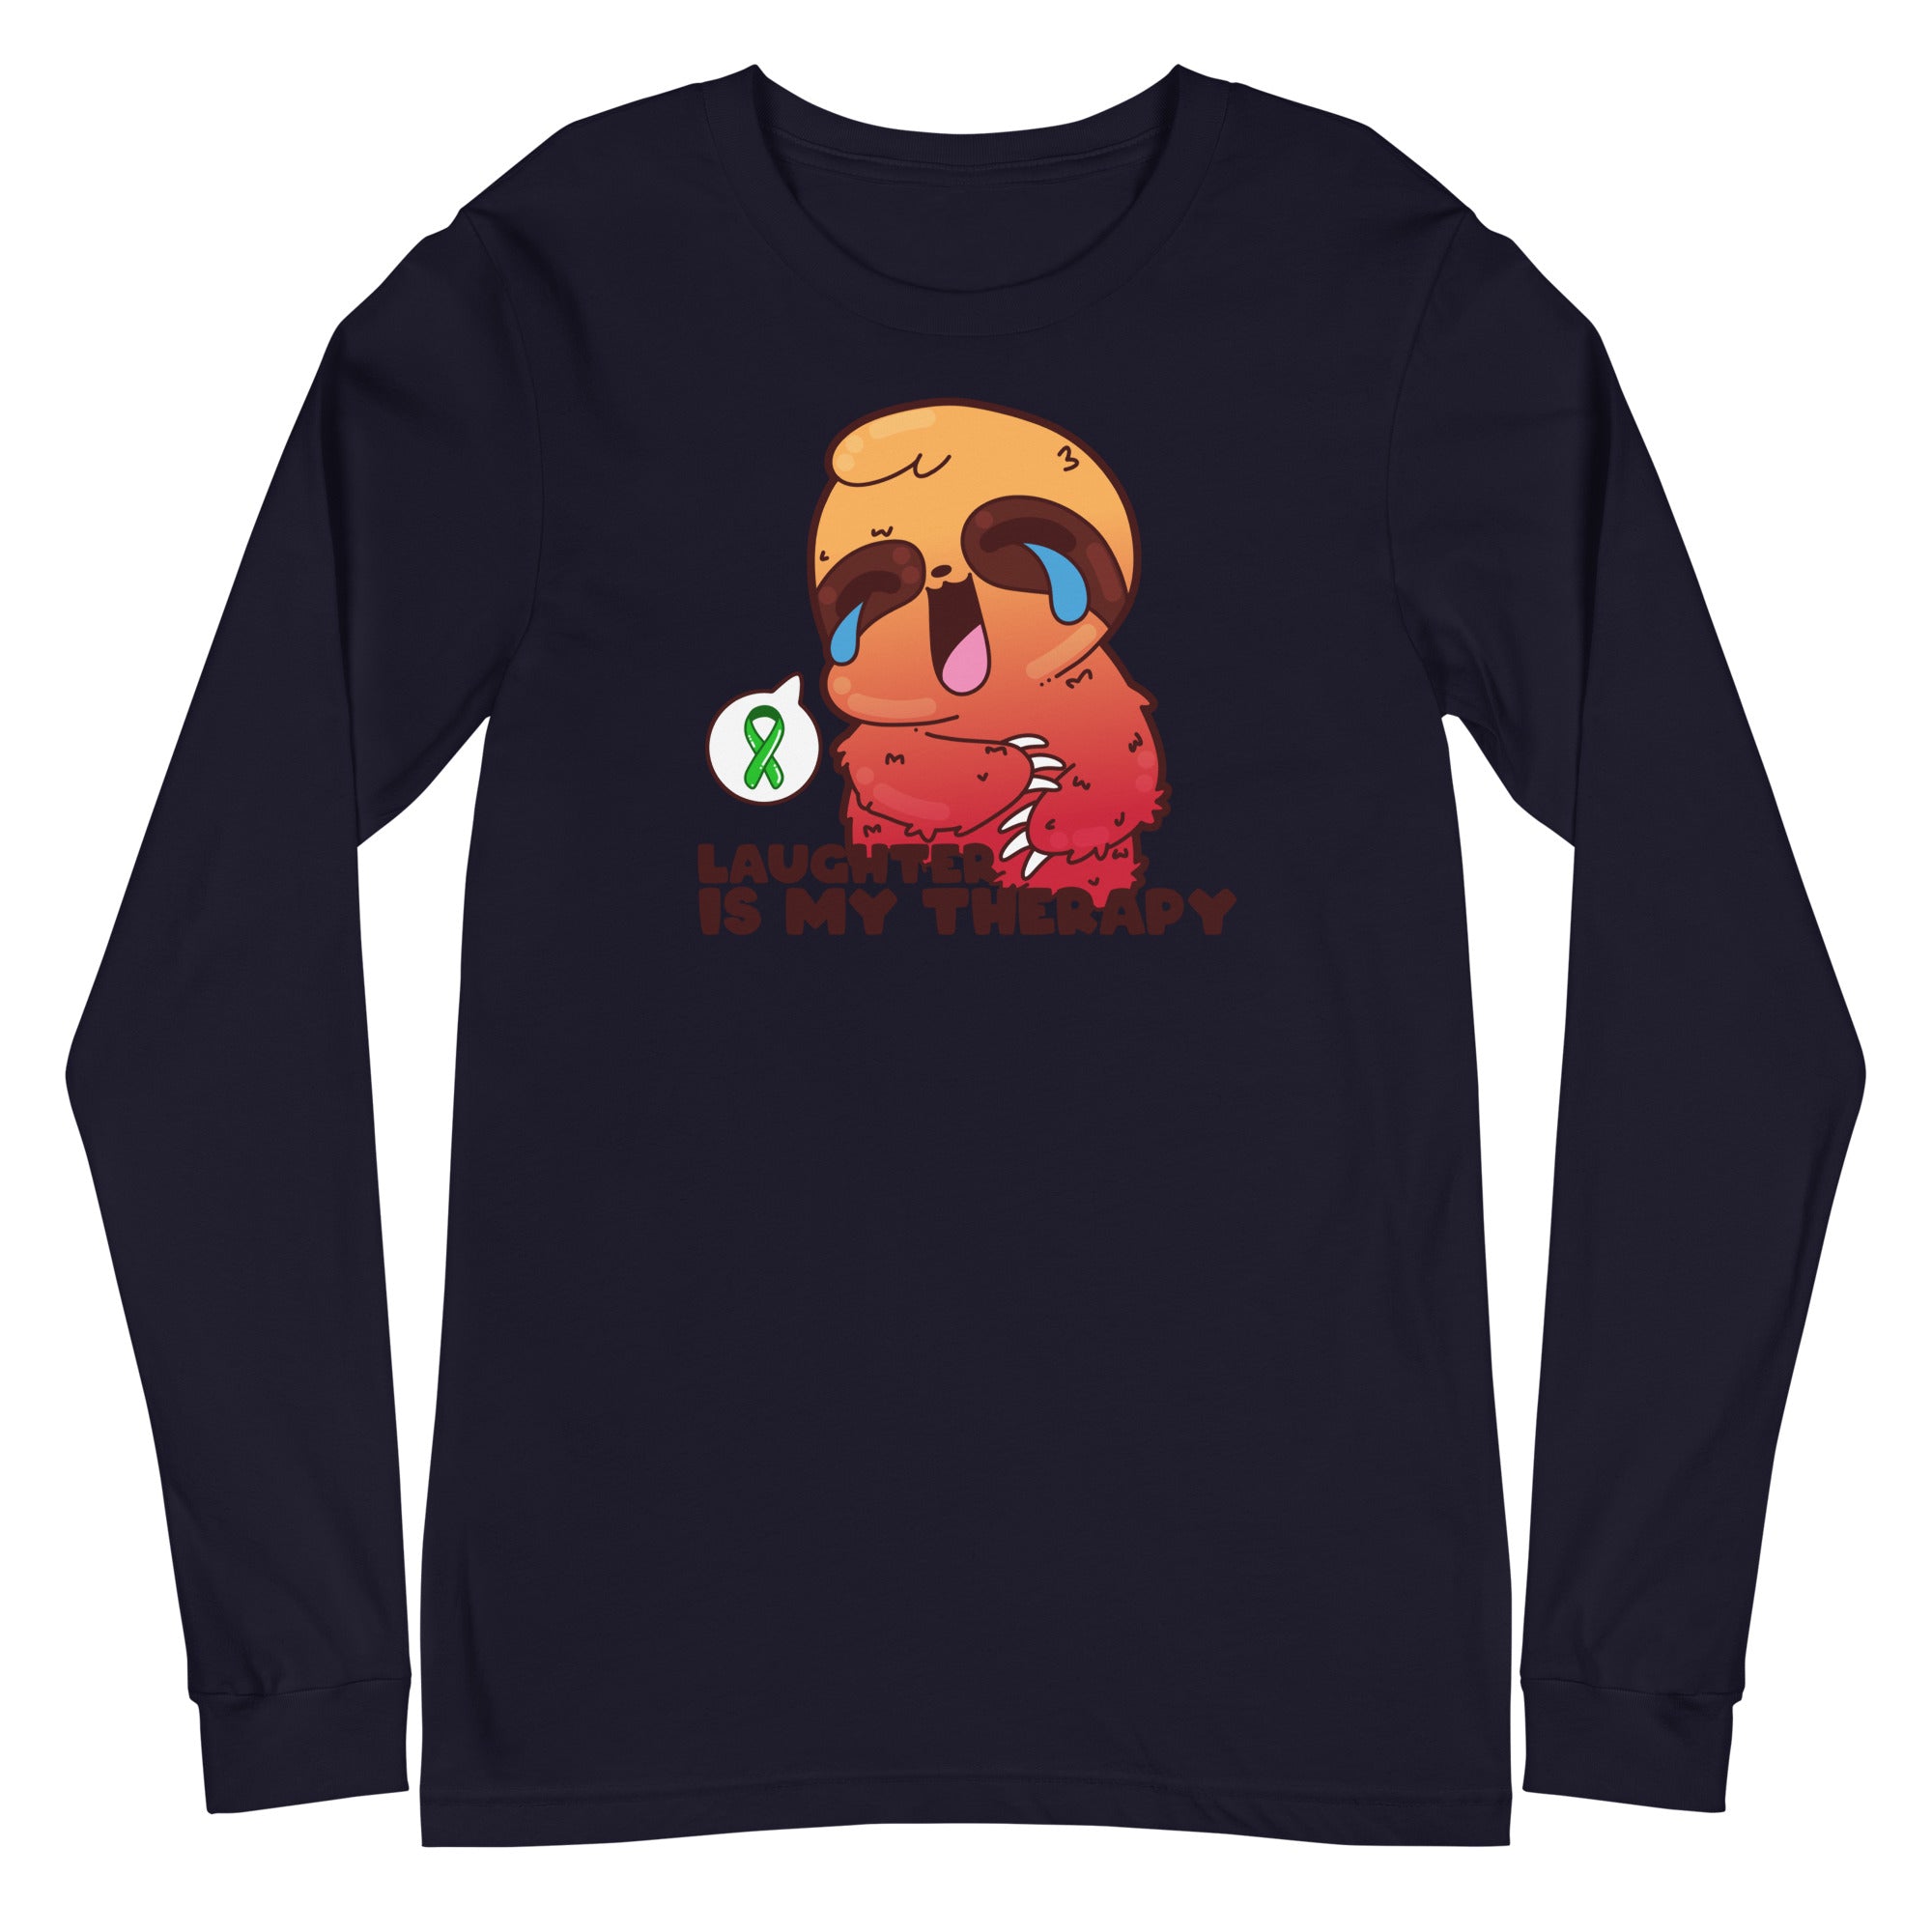 LAUGHTER IS MY THERAPY - Long Sleeve Tee - ChubbleGumLLC